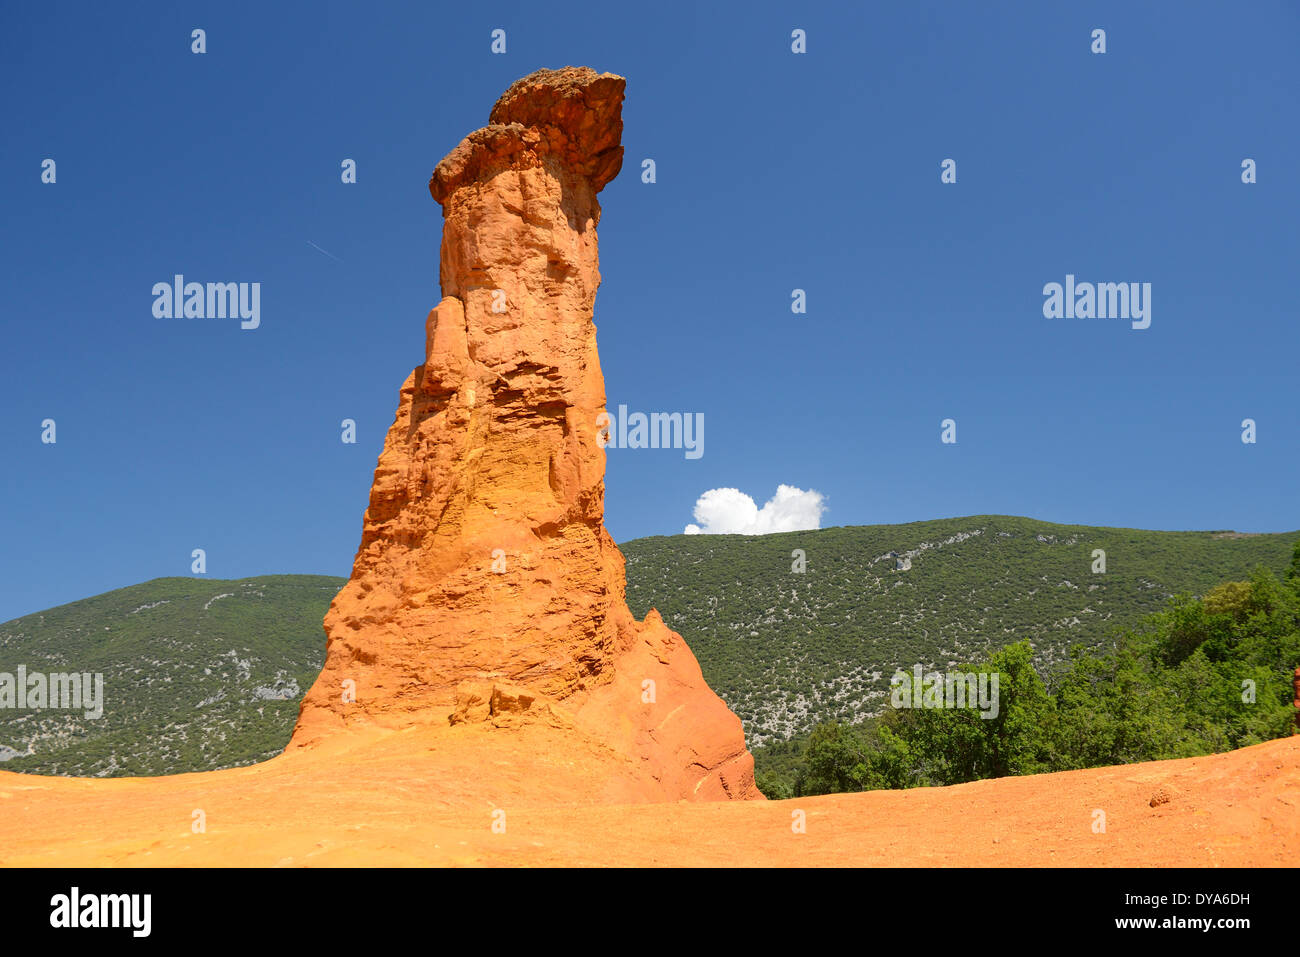 Europe, Roussillon, Vaucluse, Provence, France, ochre, rock, red, nature, hoodoo, rock formation, blue sky Stock Photo